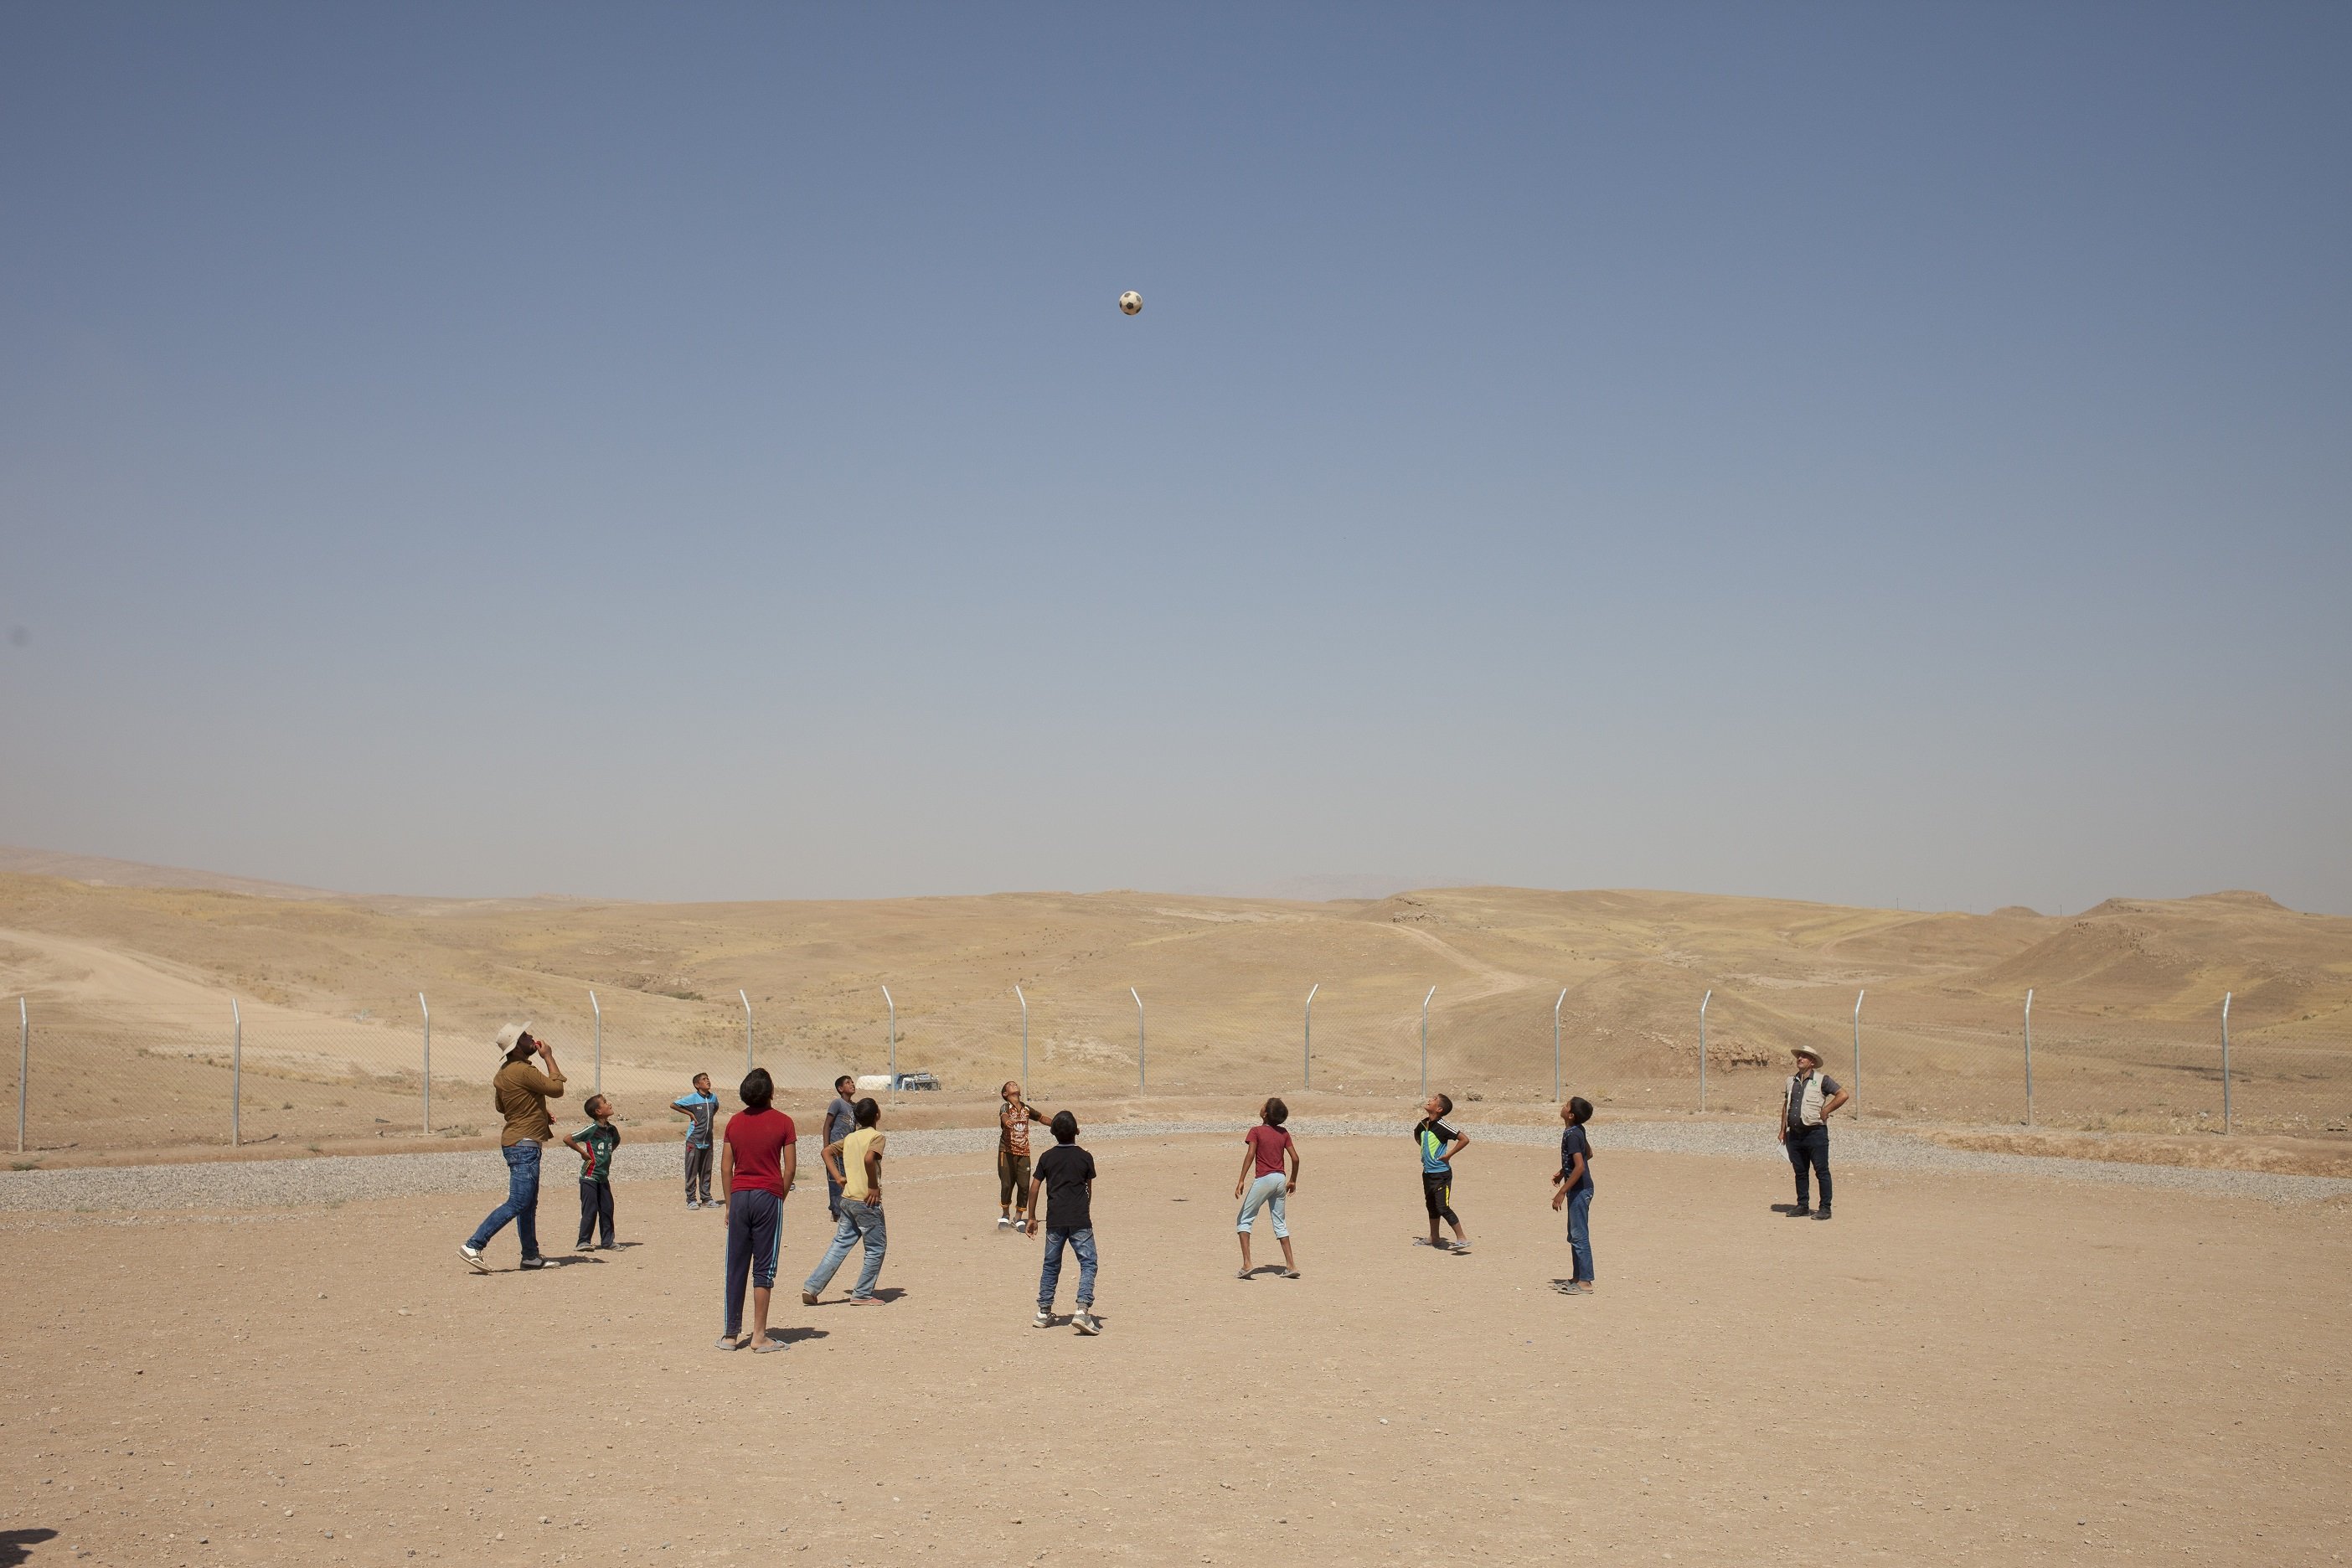 Children and adults playing soccer in a large open desert-like area.